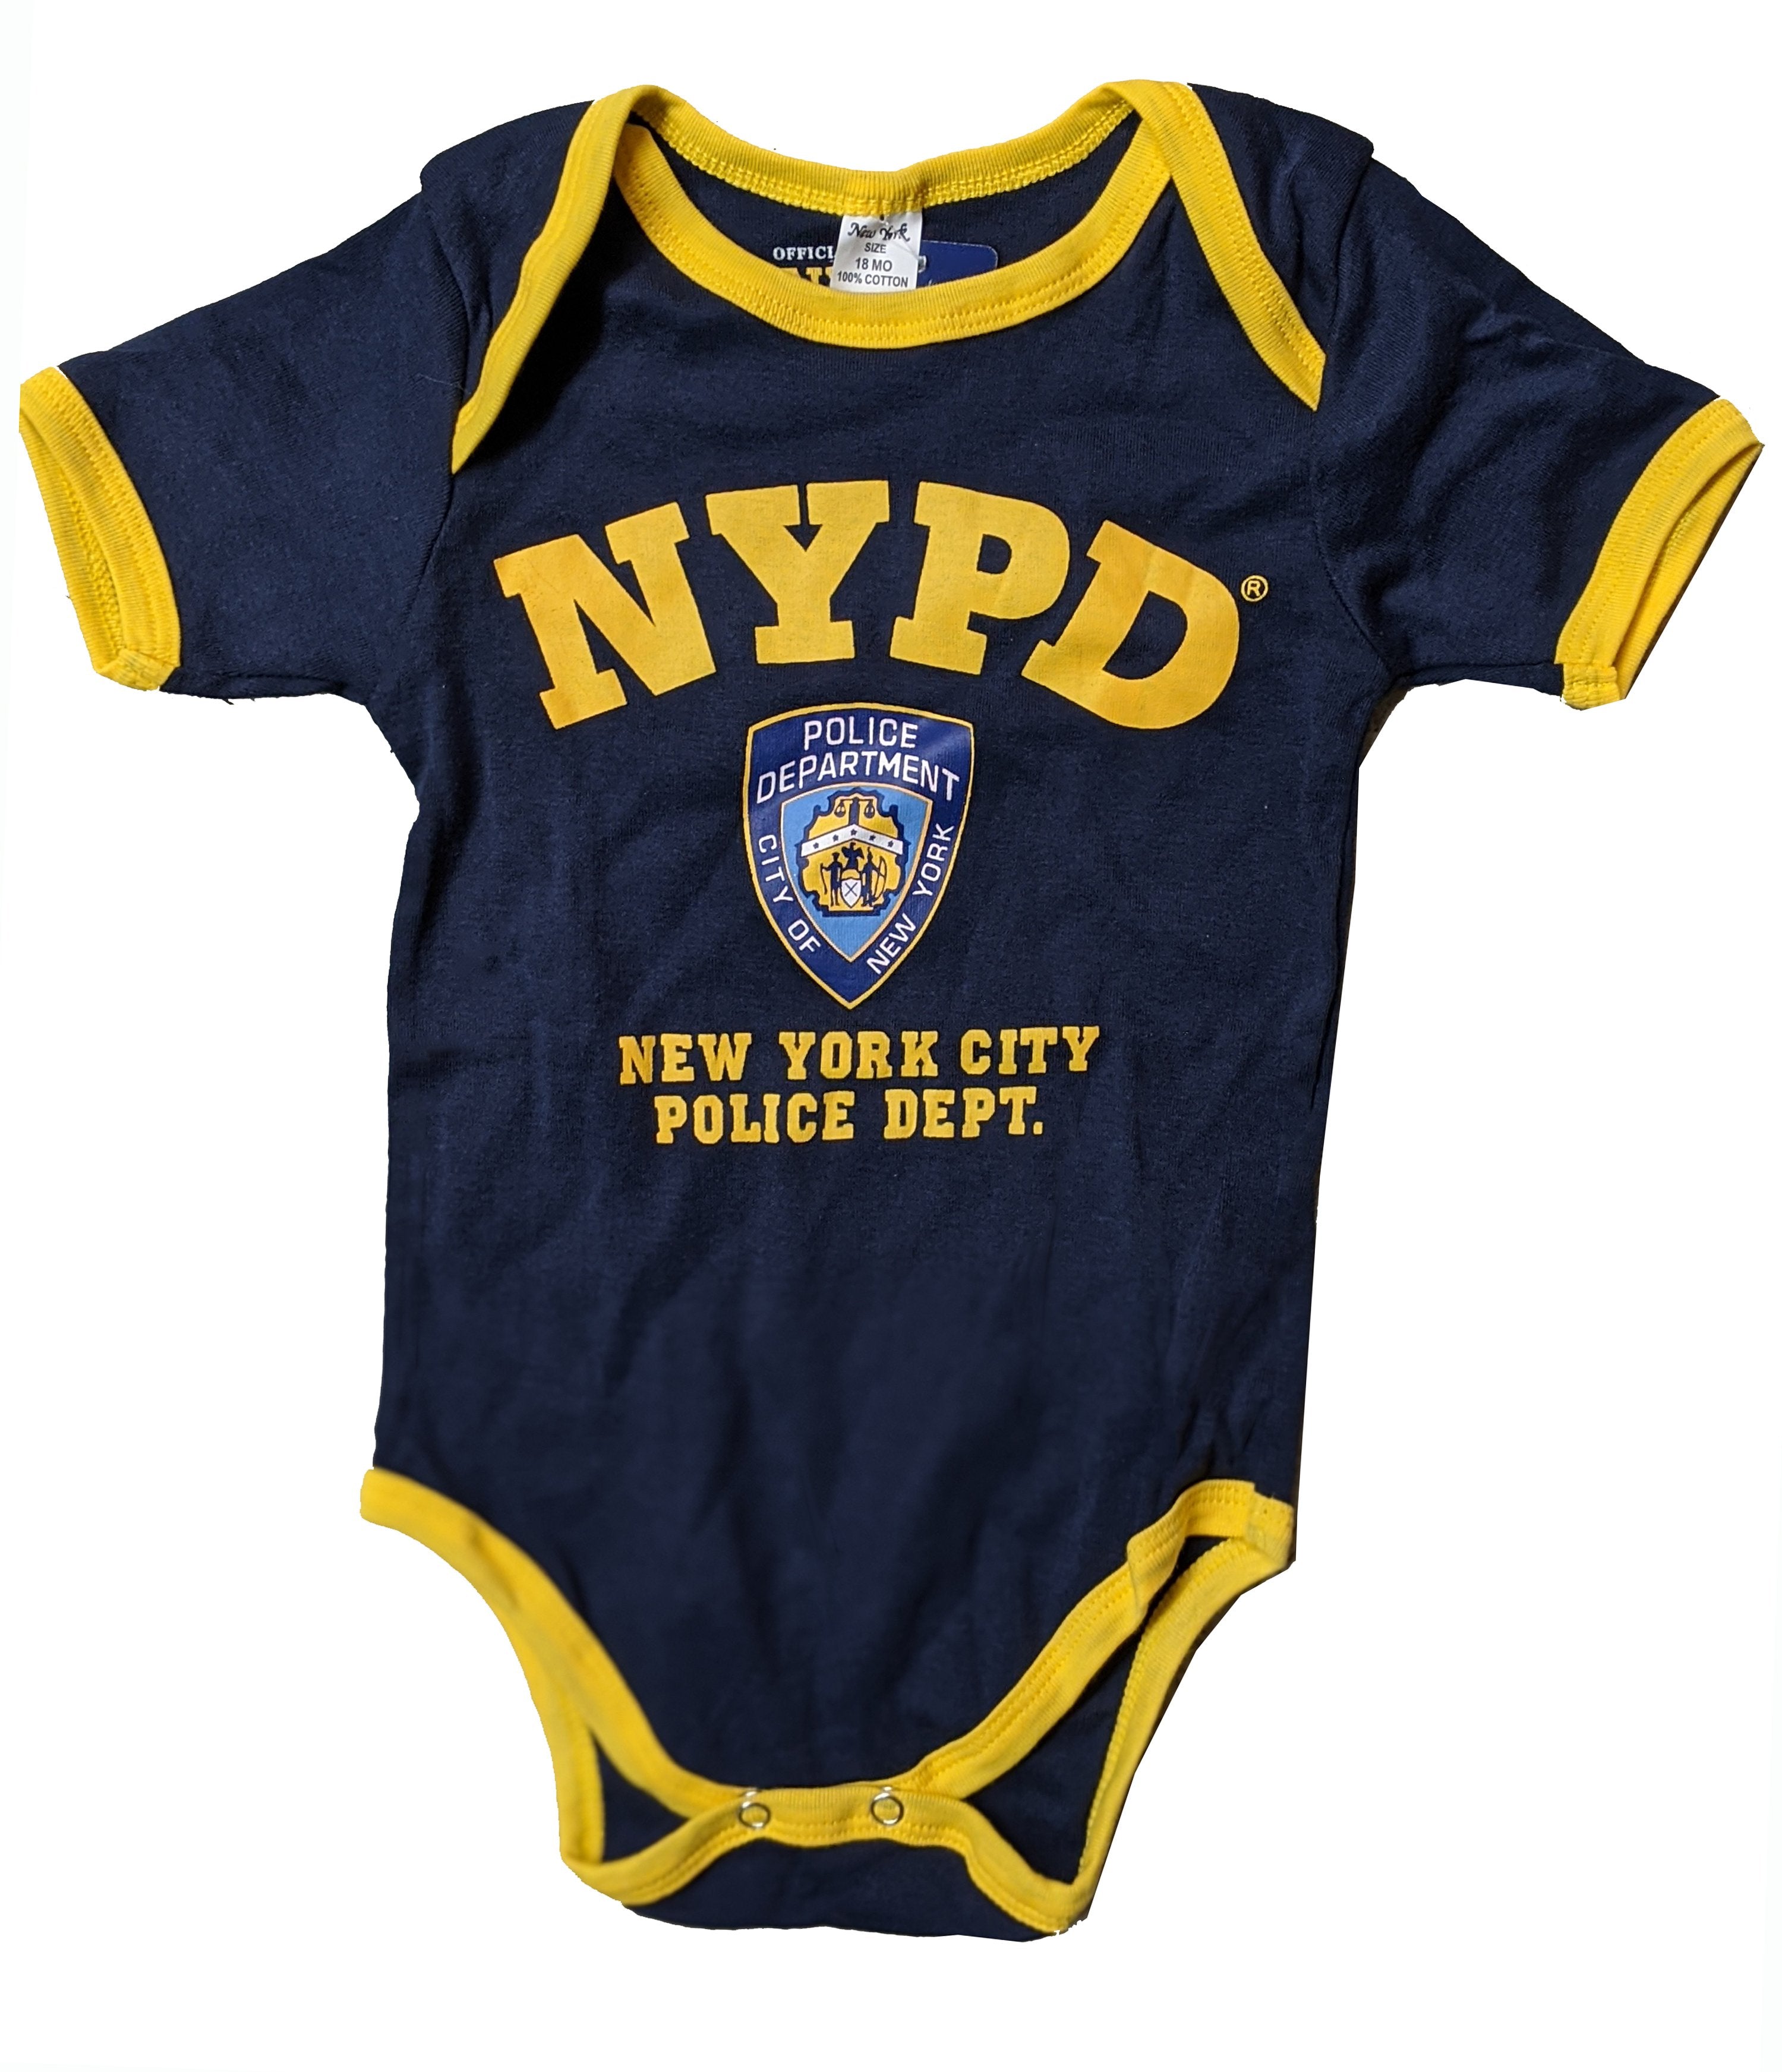 NYPD Baby Bodysuit Officially Licensed Product Navy & Yellow